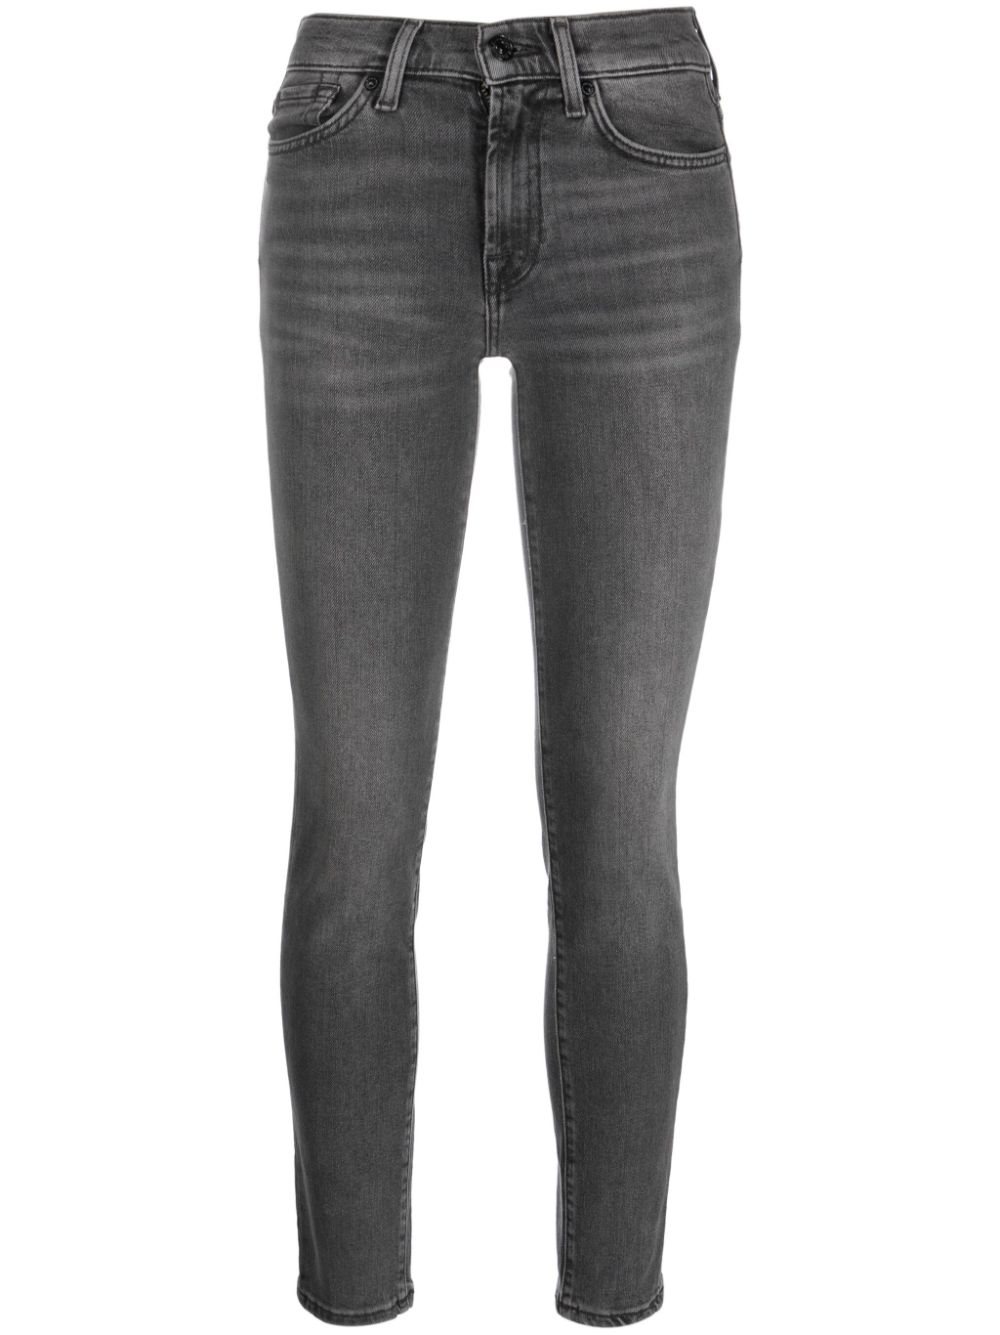 7 For All Mankind mid-rise cropped skinny jeans - Black von 7 For All Mankind